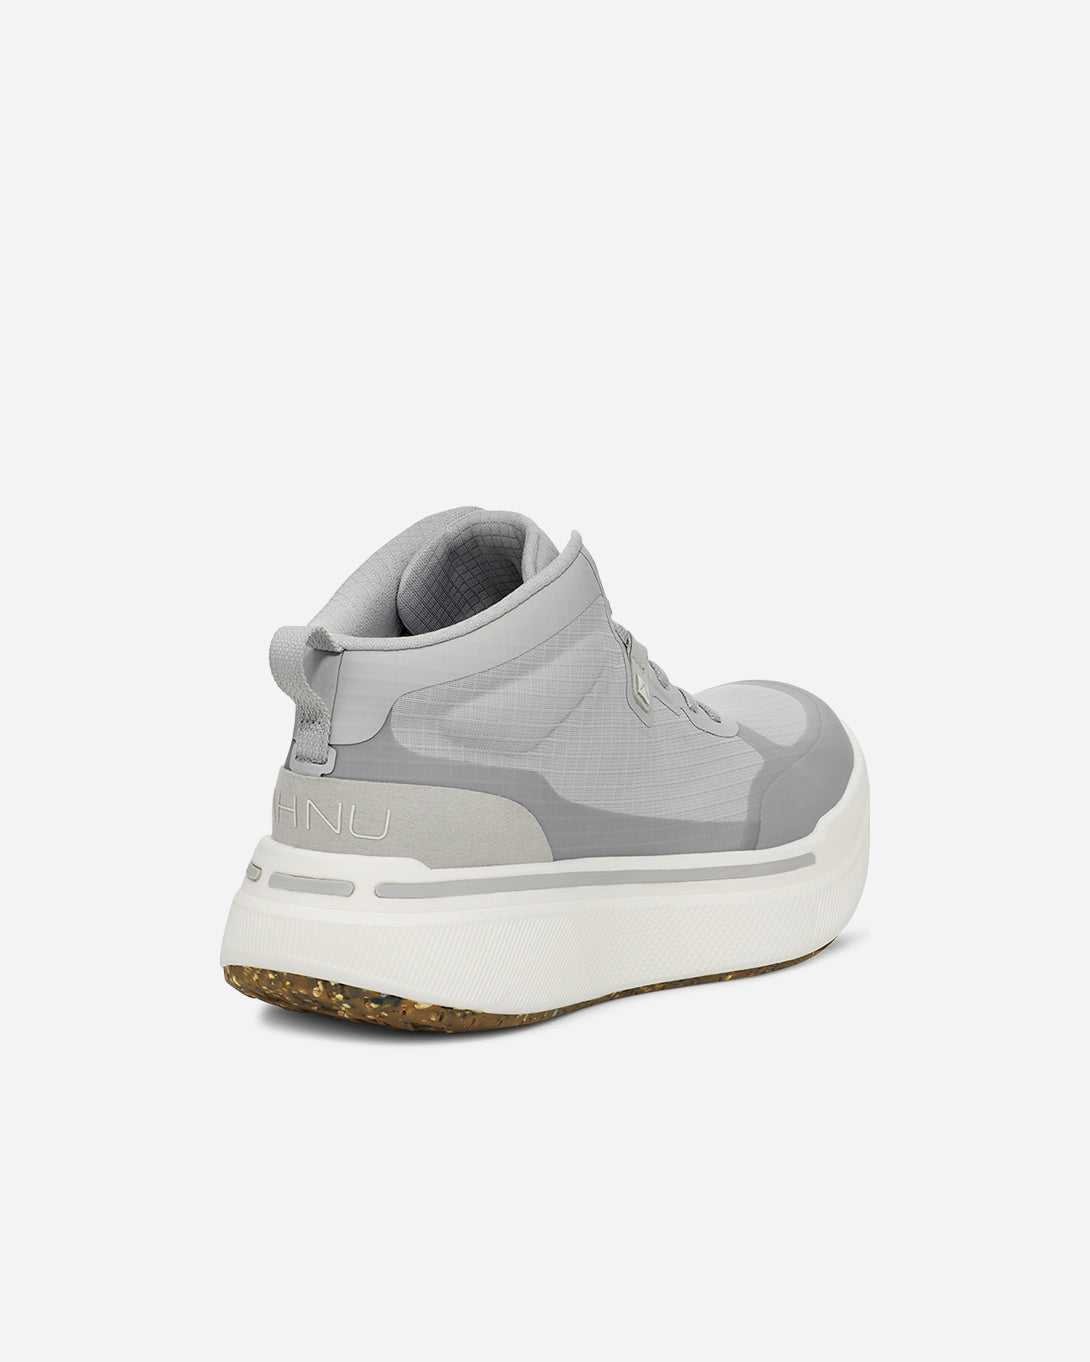 Harbor Mist/White Sequence 1 Mid Ahnu Shoes Mid Height